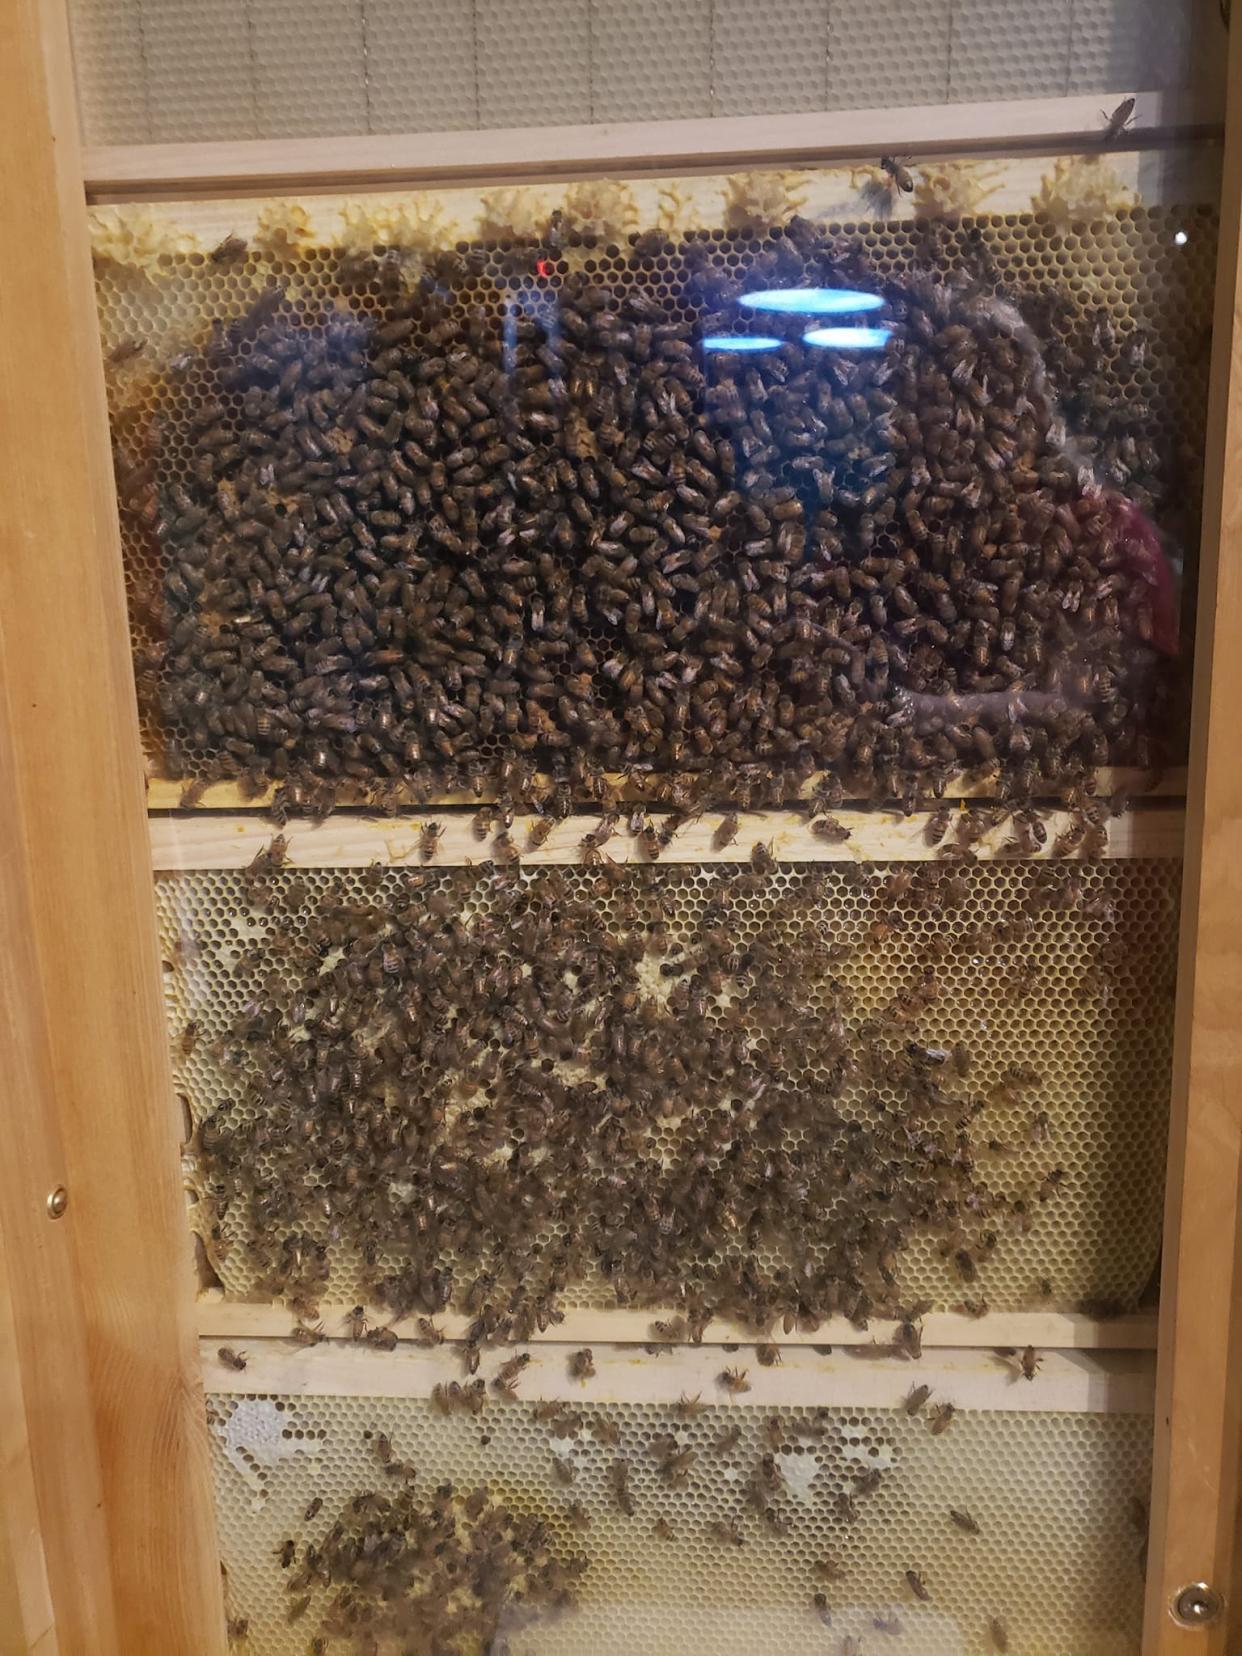 Honey bees have returned to the McKinley Presidential Library & Museum. Bees in the  museum's previous hive were killed by a pesticide last August.